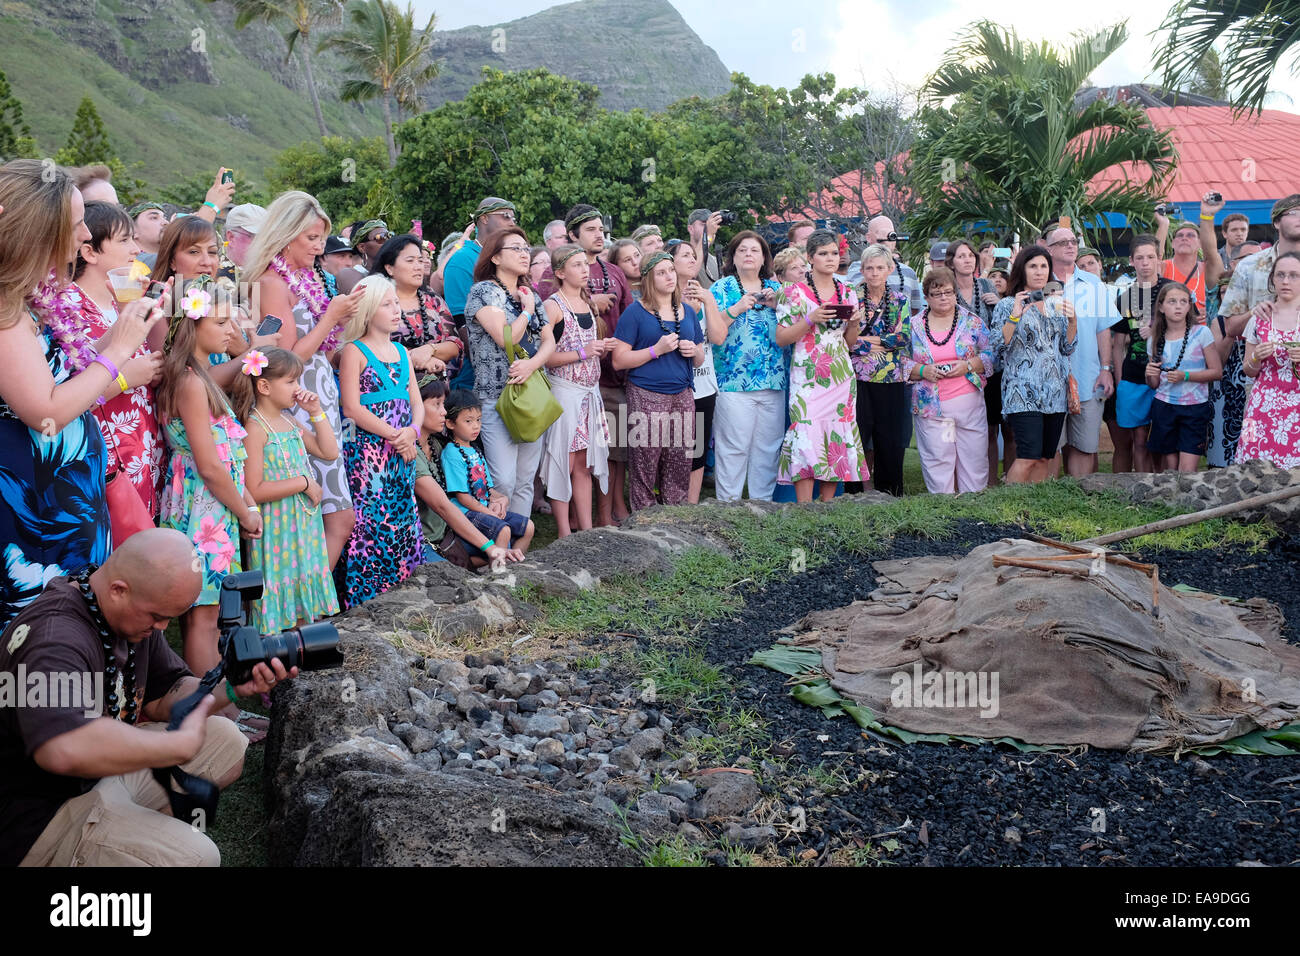 Getting ready to unveil the Roasted Pig at Chief's Luau in Oahu, Hawaii Stock Photo